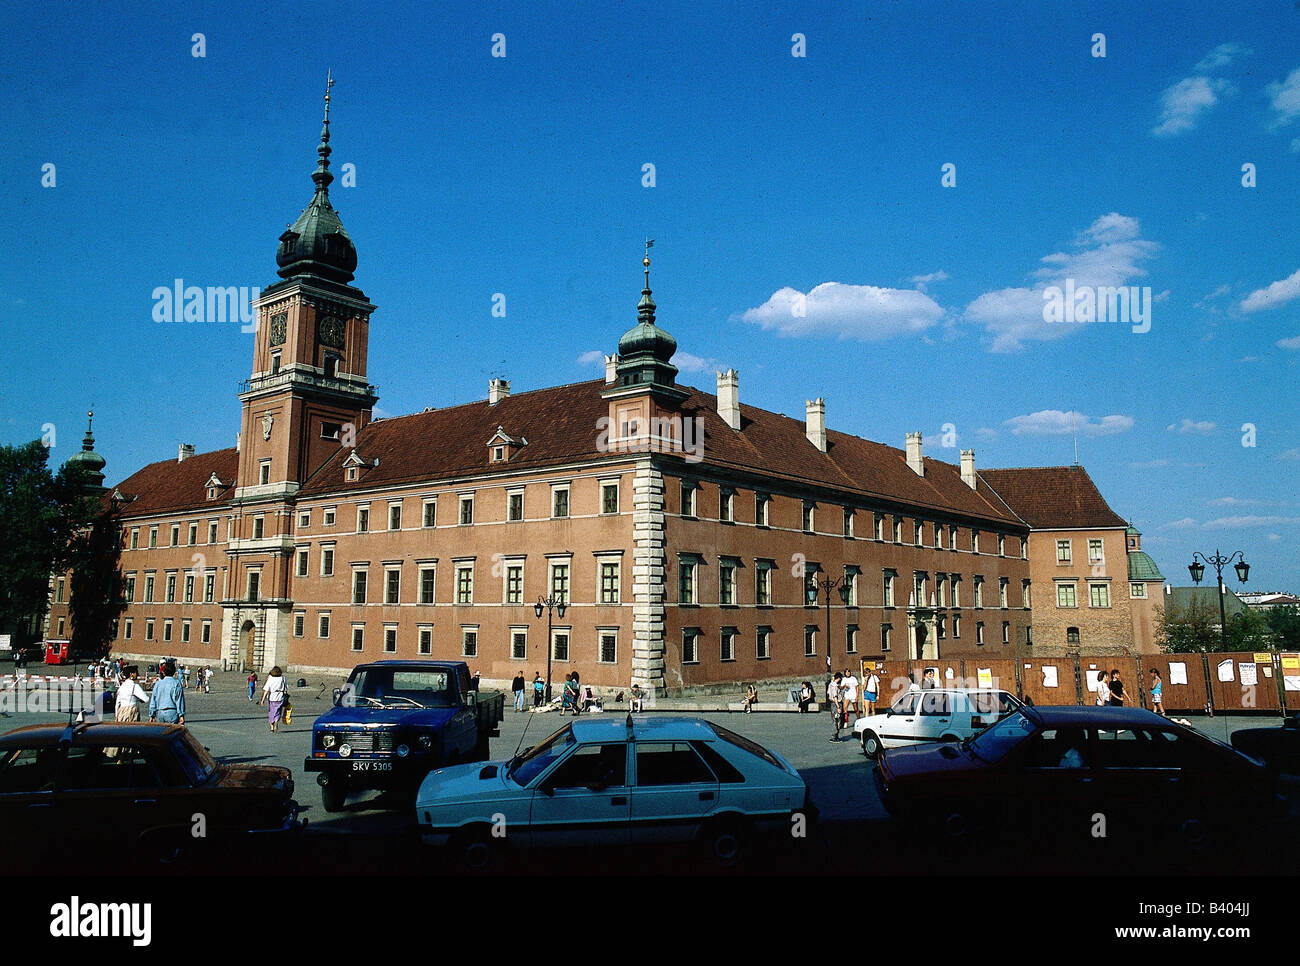 geography / travel, Poland, Warsaw, castles, royal castle, residence of the Polish kings 1611 - 1795, 17th century, destroyed in World War II, 1971 - 1981 restored , built on behalf of King Siegmunt III Wasa, enlarged under August II.  (Friedrich August I. 'the strong', elector of Saxony), completed under Stanislaw II. Poniatowski, architecture, baroque, kingdom, Rzeczpospolita, Polska, nobility republic, old town, historical, historic, ancient, UNESCO, World Heritage Site, Stock Photo